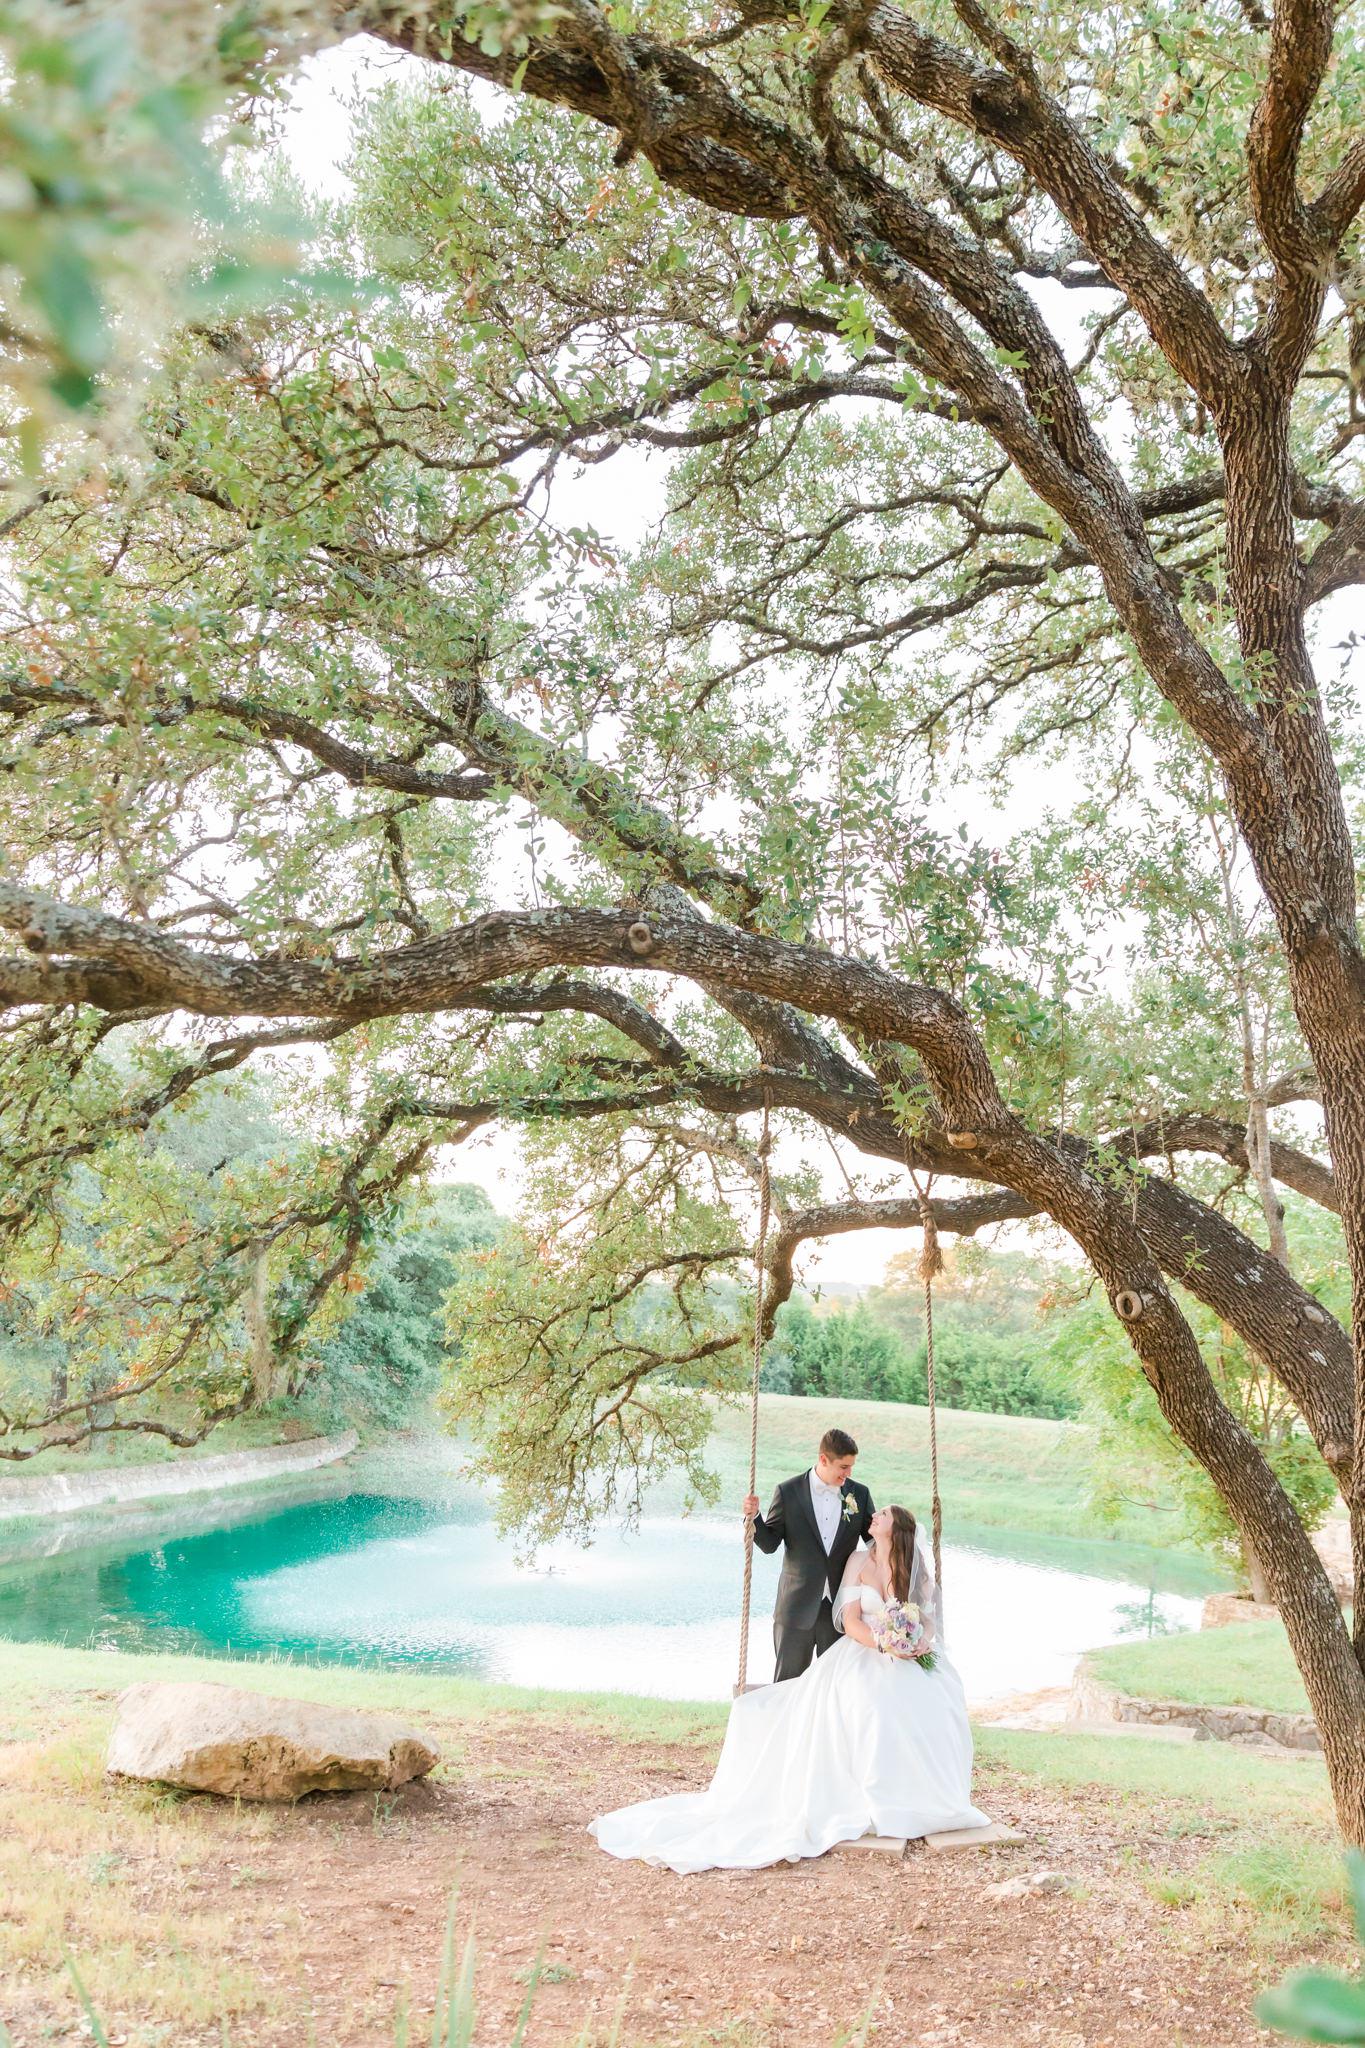 A Light Blue and Lavender Wedding at Kendall Point and Sacred Heart Chapel by Dawn Elizabeth Studios, San Antonio Wedding Photographer